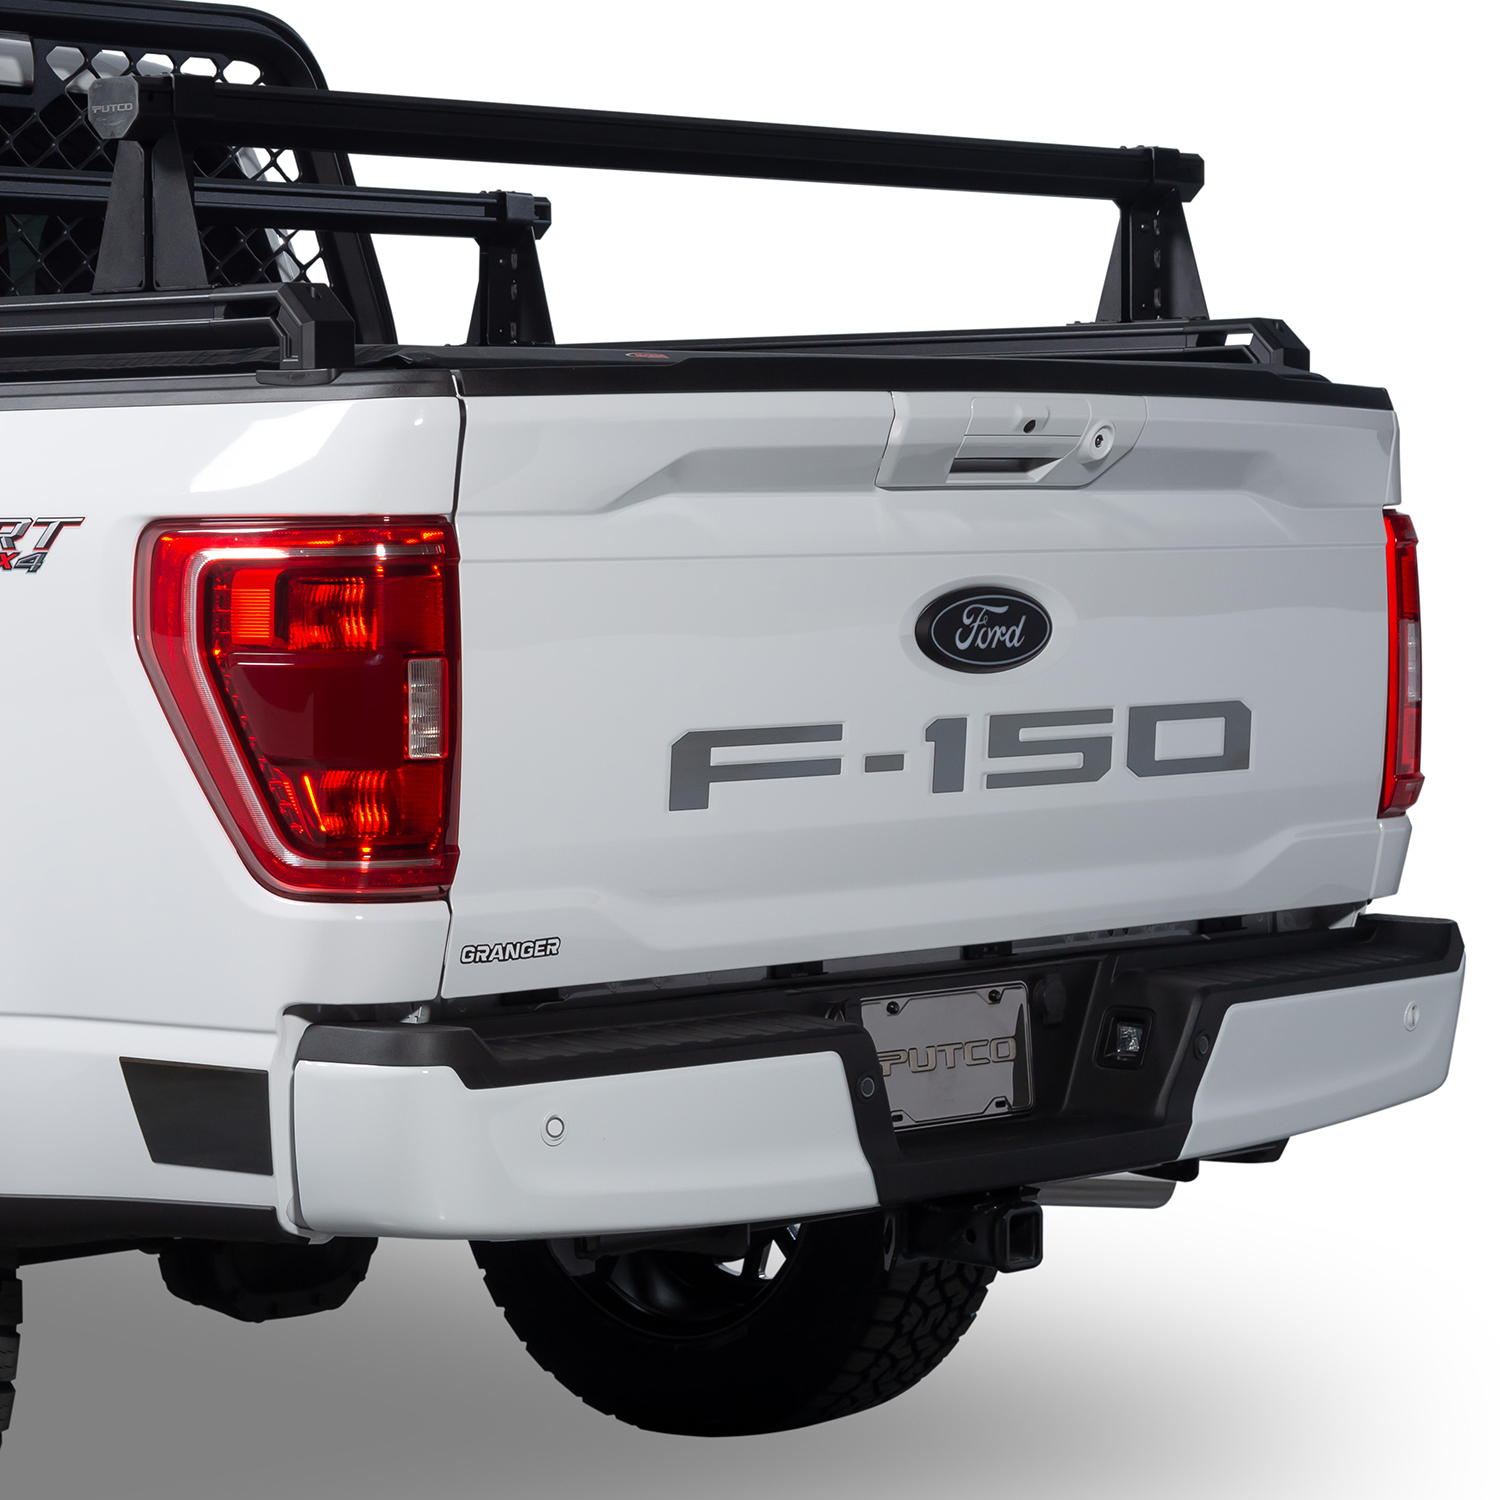 https://www.putco.com/wp-content/uploads/Ford-F150-Tailgate-Lettering-Kit-Stainless-steel-Side-View.jpg